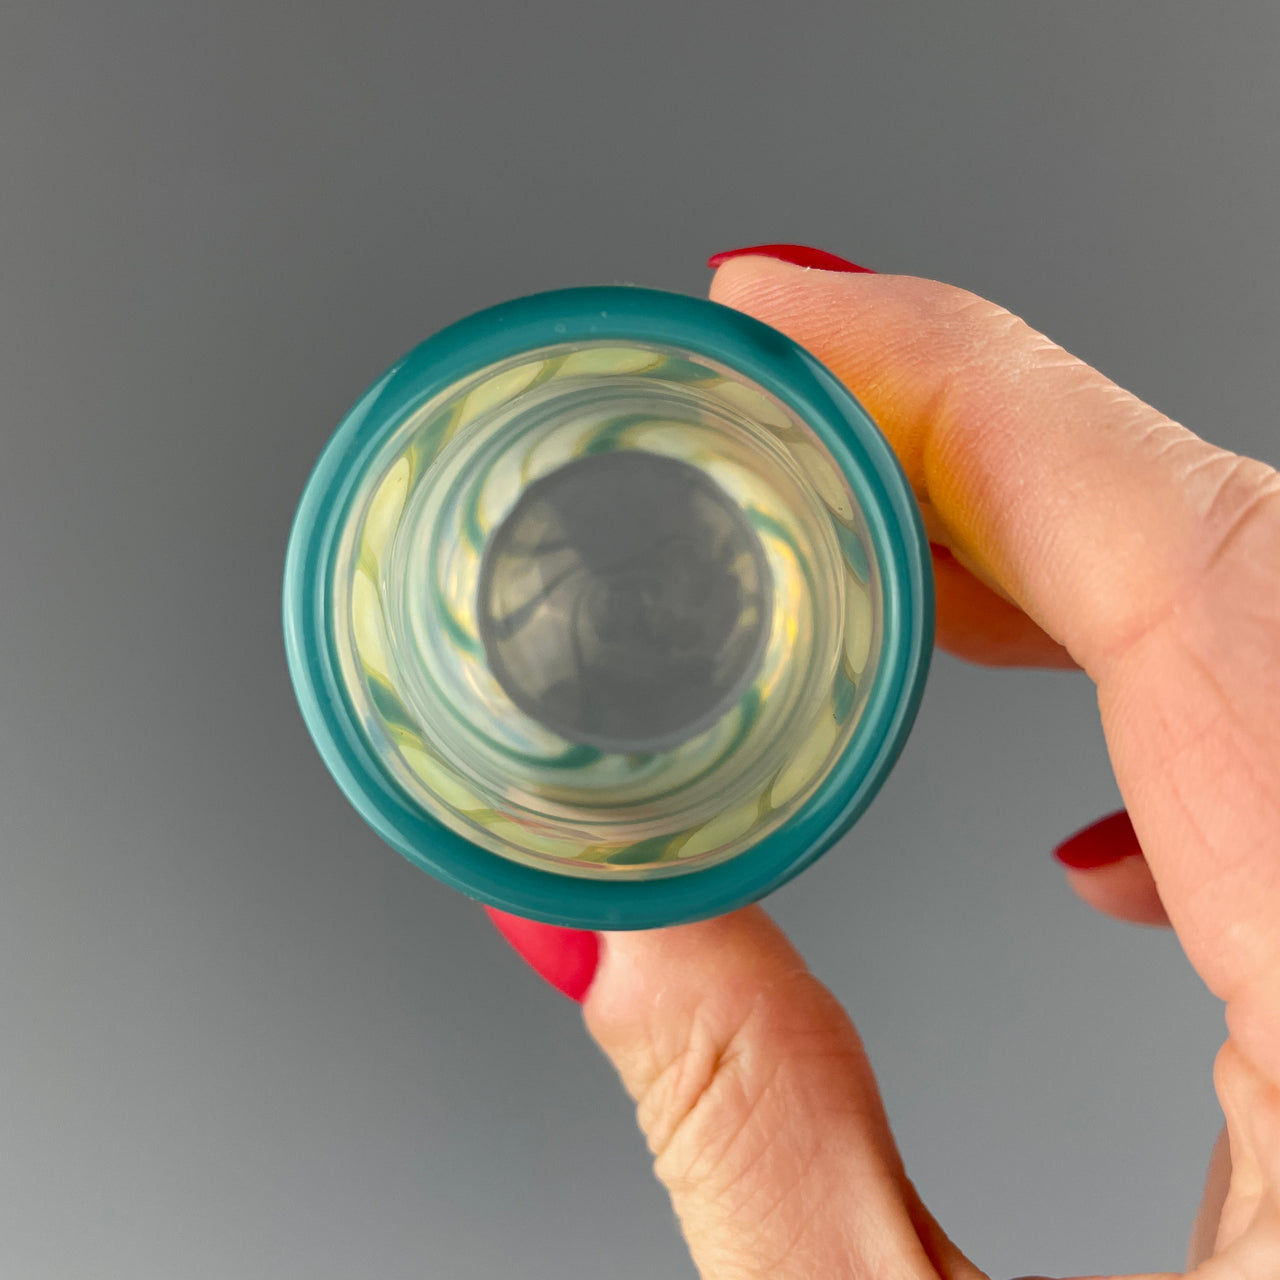 inside of a clear and teal swirl shot glass